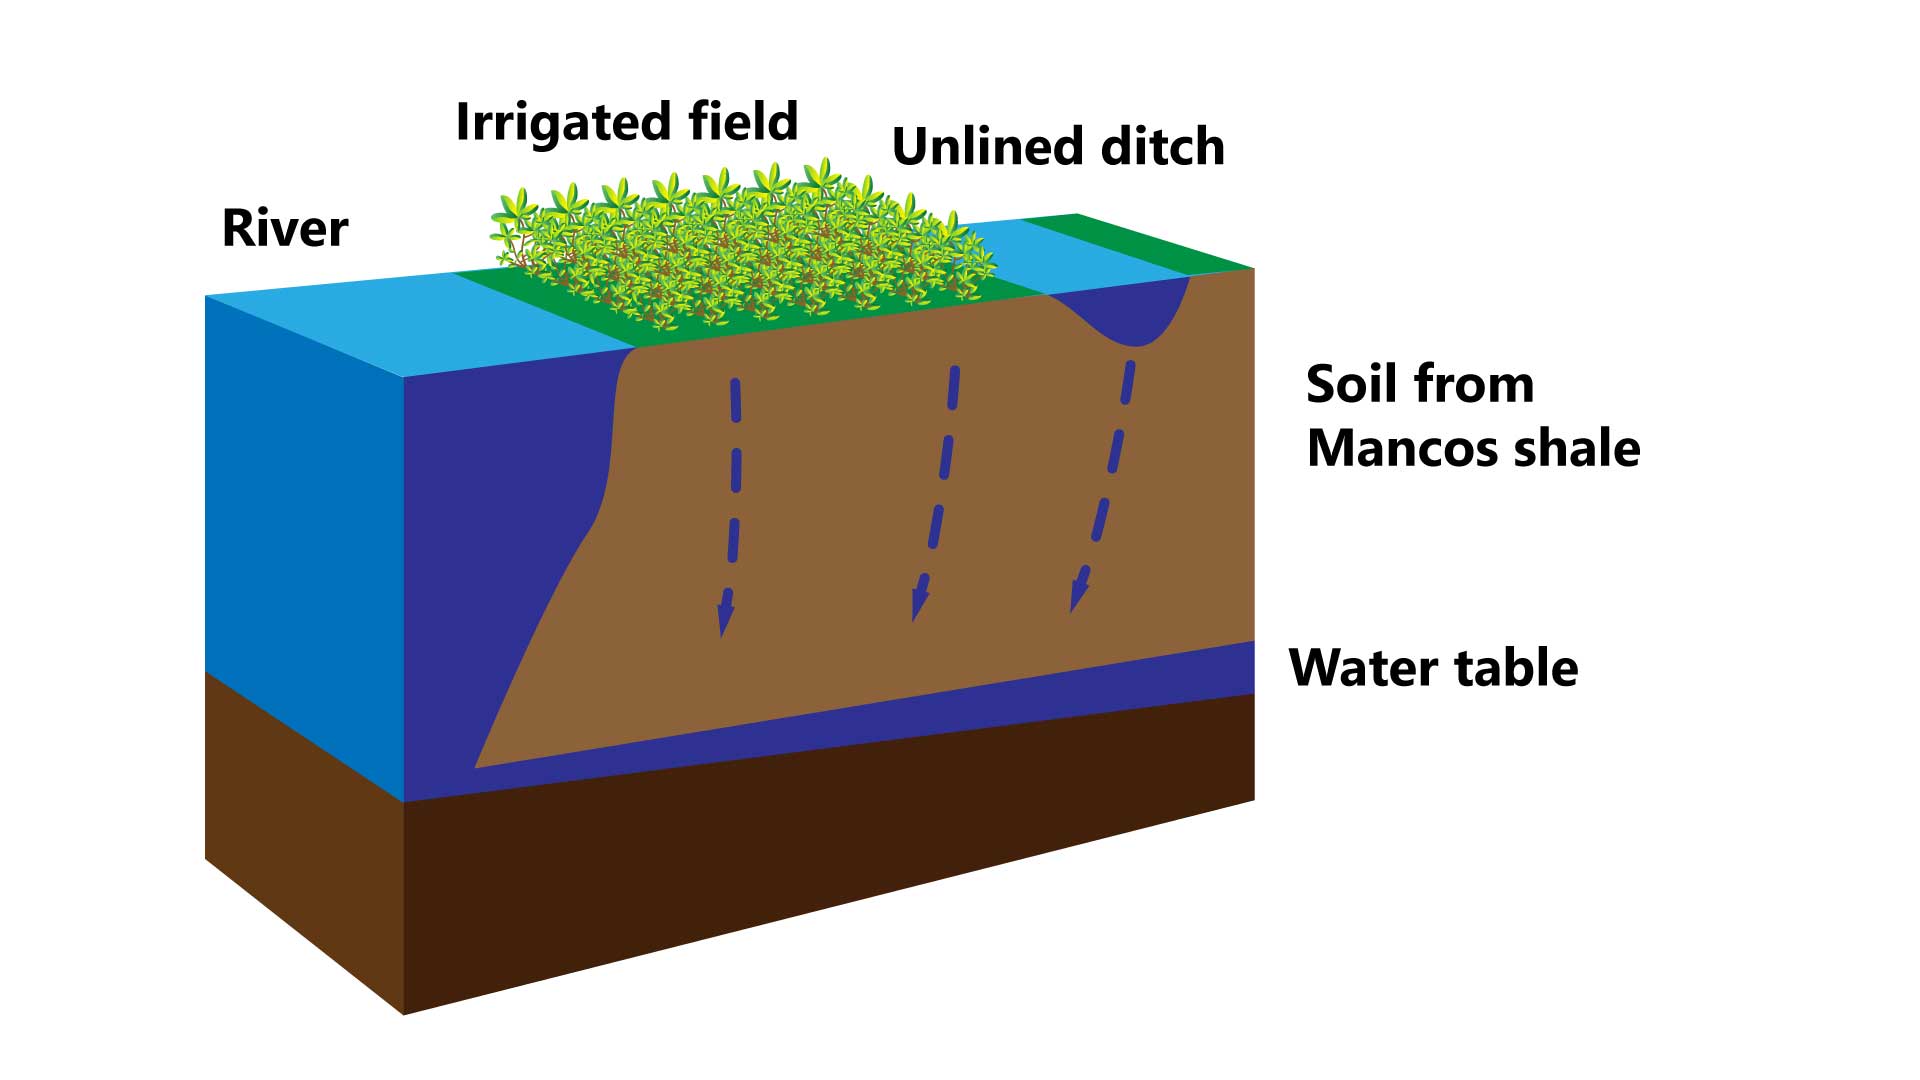 Water from sources such as earthen ditches and irrigated fields seeps through high selenium soils derived from Mancos shale. The water absorbs selenium while going through the Mancos shale, and then enters the groundwater. The higher-selenium groundwater eventually discharges into the river and increases the overall selenium concentration in the river.